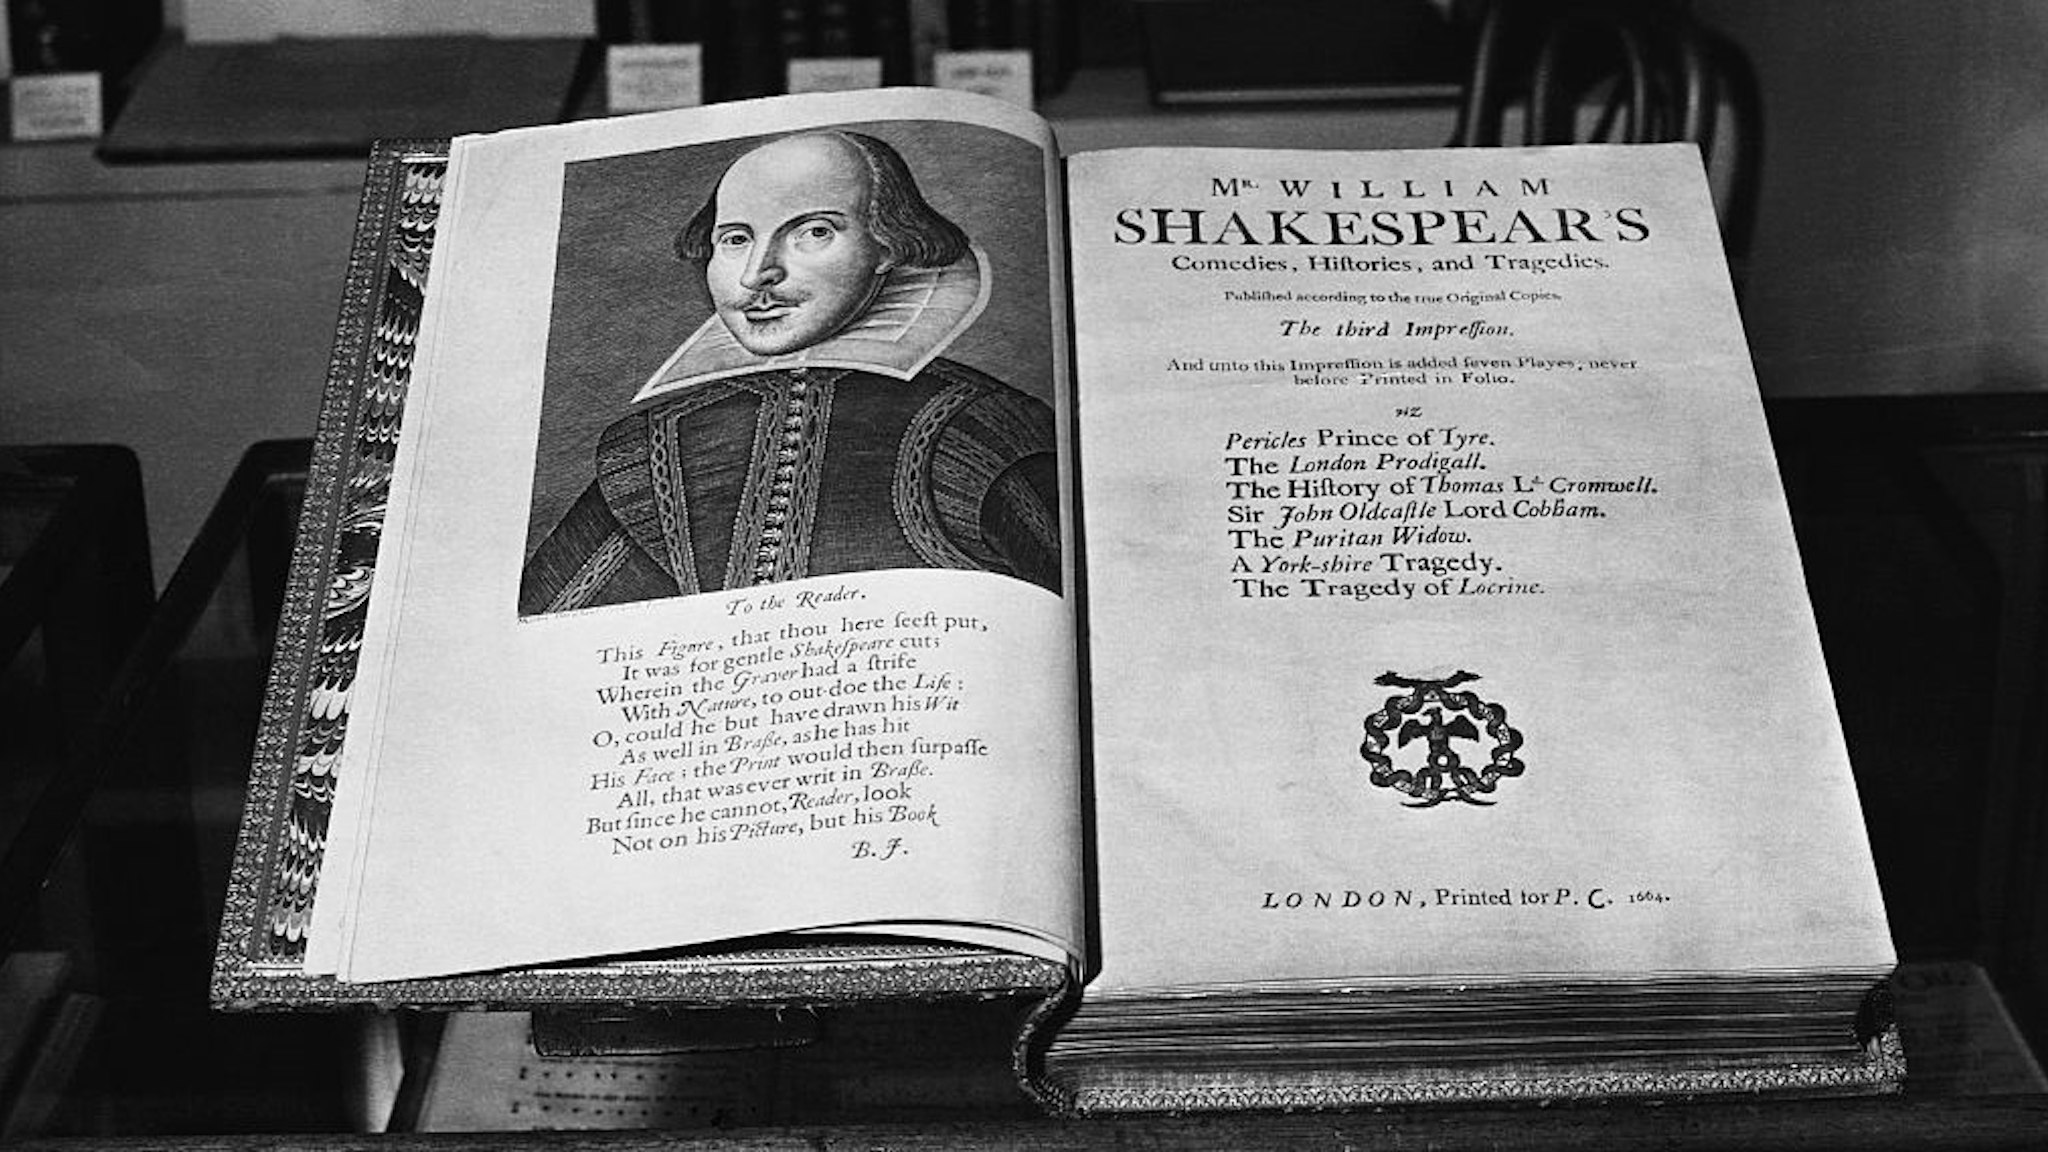 (Original Caption) The twelfth Antiques Dealers' Fair and Exhibition is to be opened tomorrow in the Great Hall at Grosvenor House, Park Lane, London, W., by Mrs Winston Churchill, wife of the Prime Minister. 10/6/52. Antique Dealers' Fair: a copy of the third Folio edition of Shakespeare. Printed in 1664. (Photo by ©